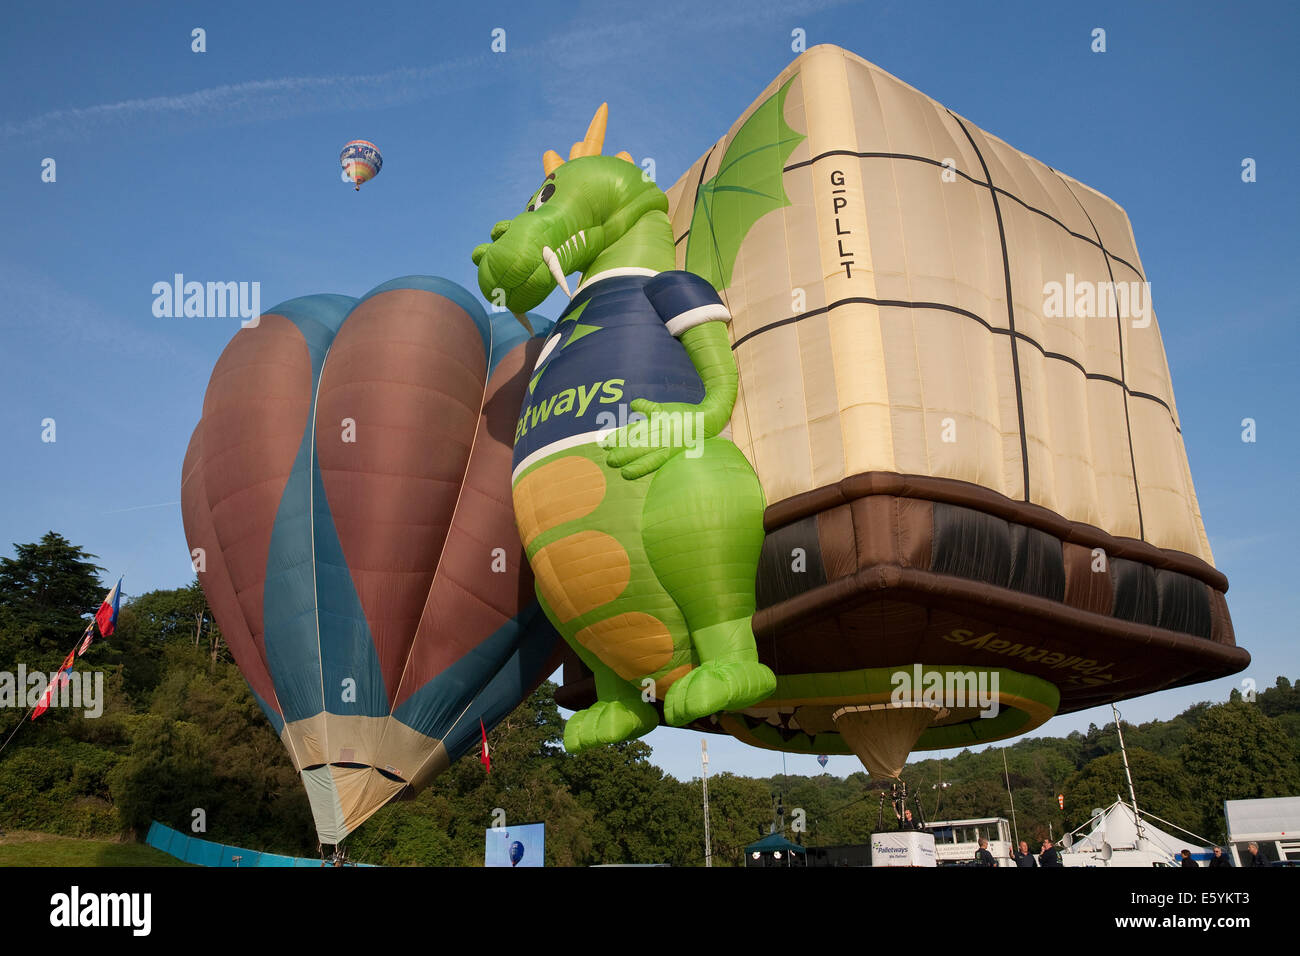 Bristol, UK. 8th August, 2014. Battle of the balloons at the Bristol International Balloon Fiesta Credit: Keith Larby/Alamy Live News Stock Photo